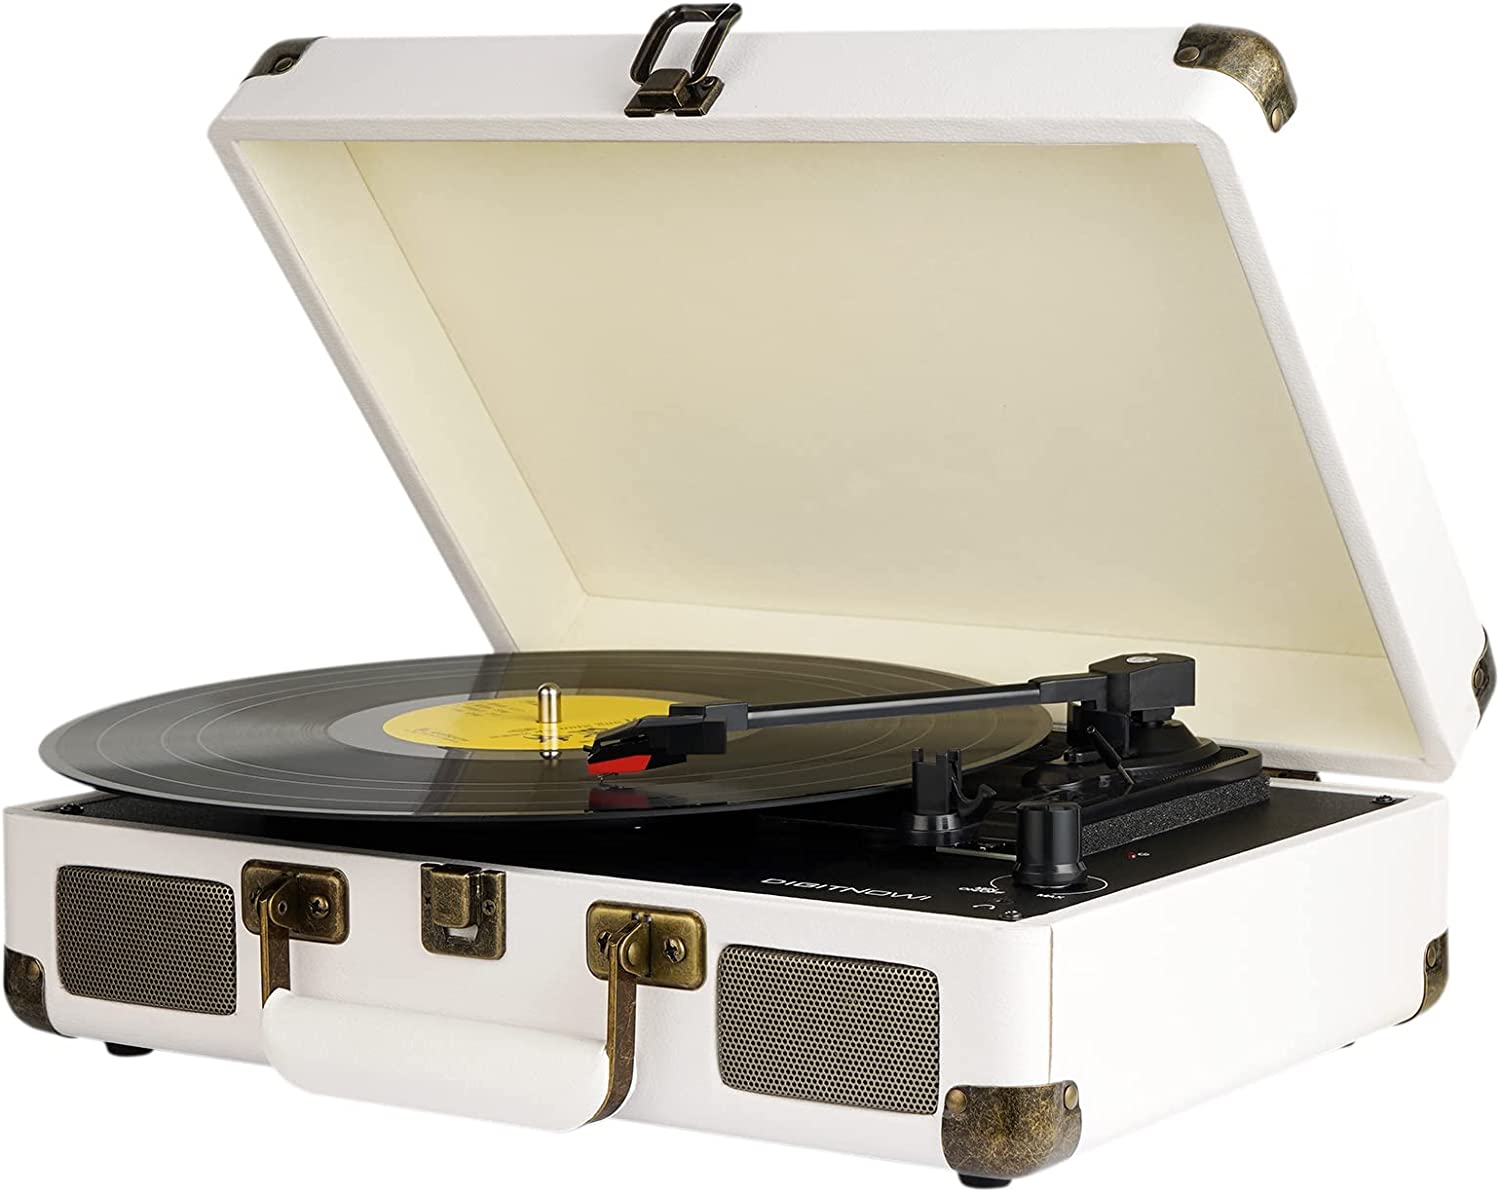 DIGITNOW Turntable Record Player 3 Speeds with Built-in Stereo Speakers, Suitcase Design - White